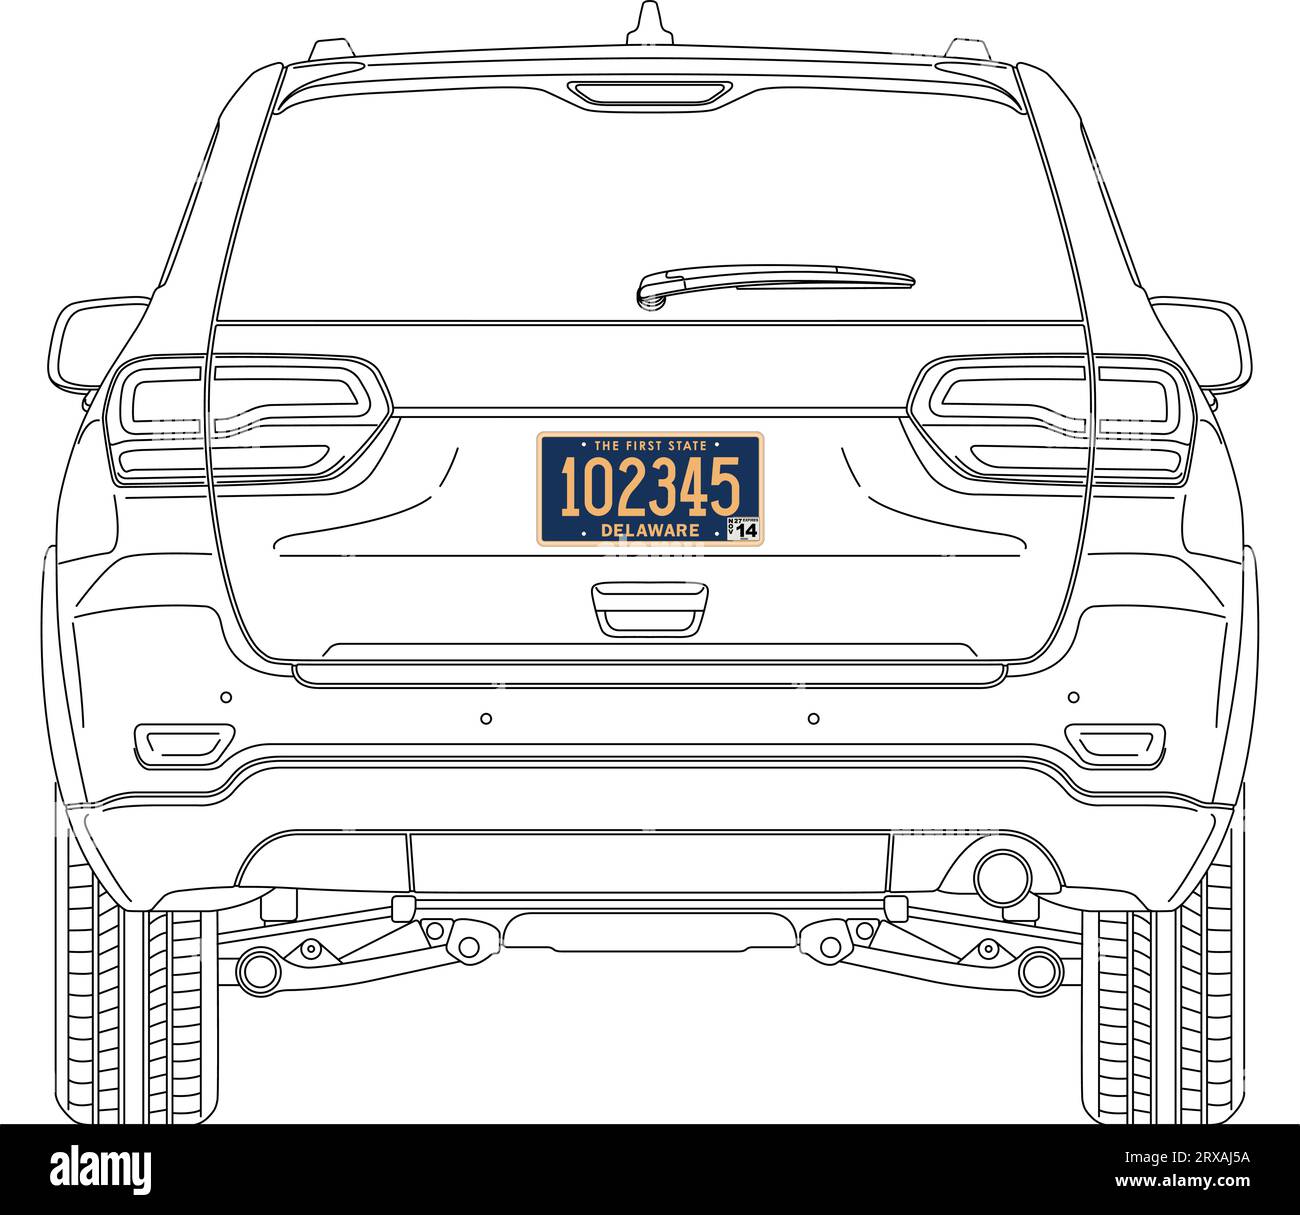 Delaware State car license plate in the back of a car, USA, United States, vector illustration Stock Vector